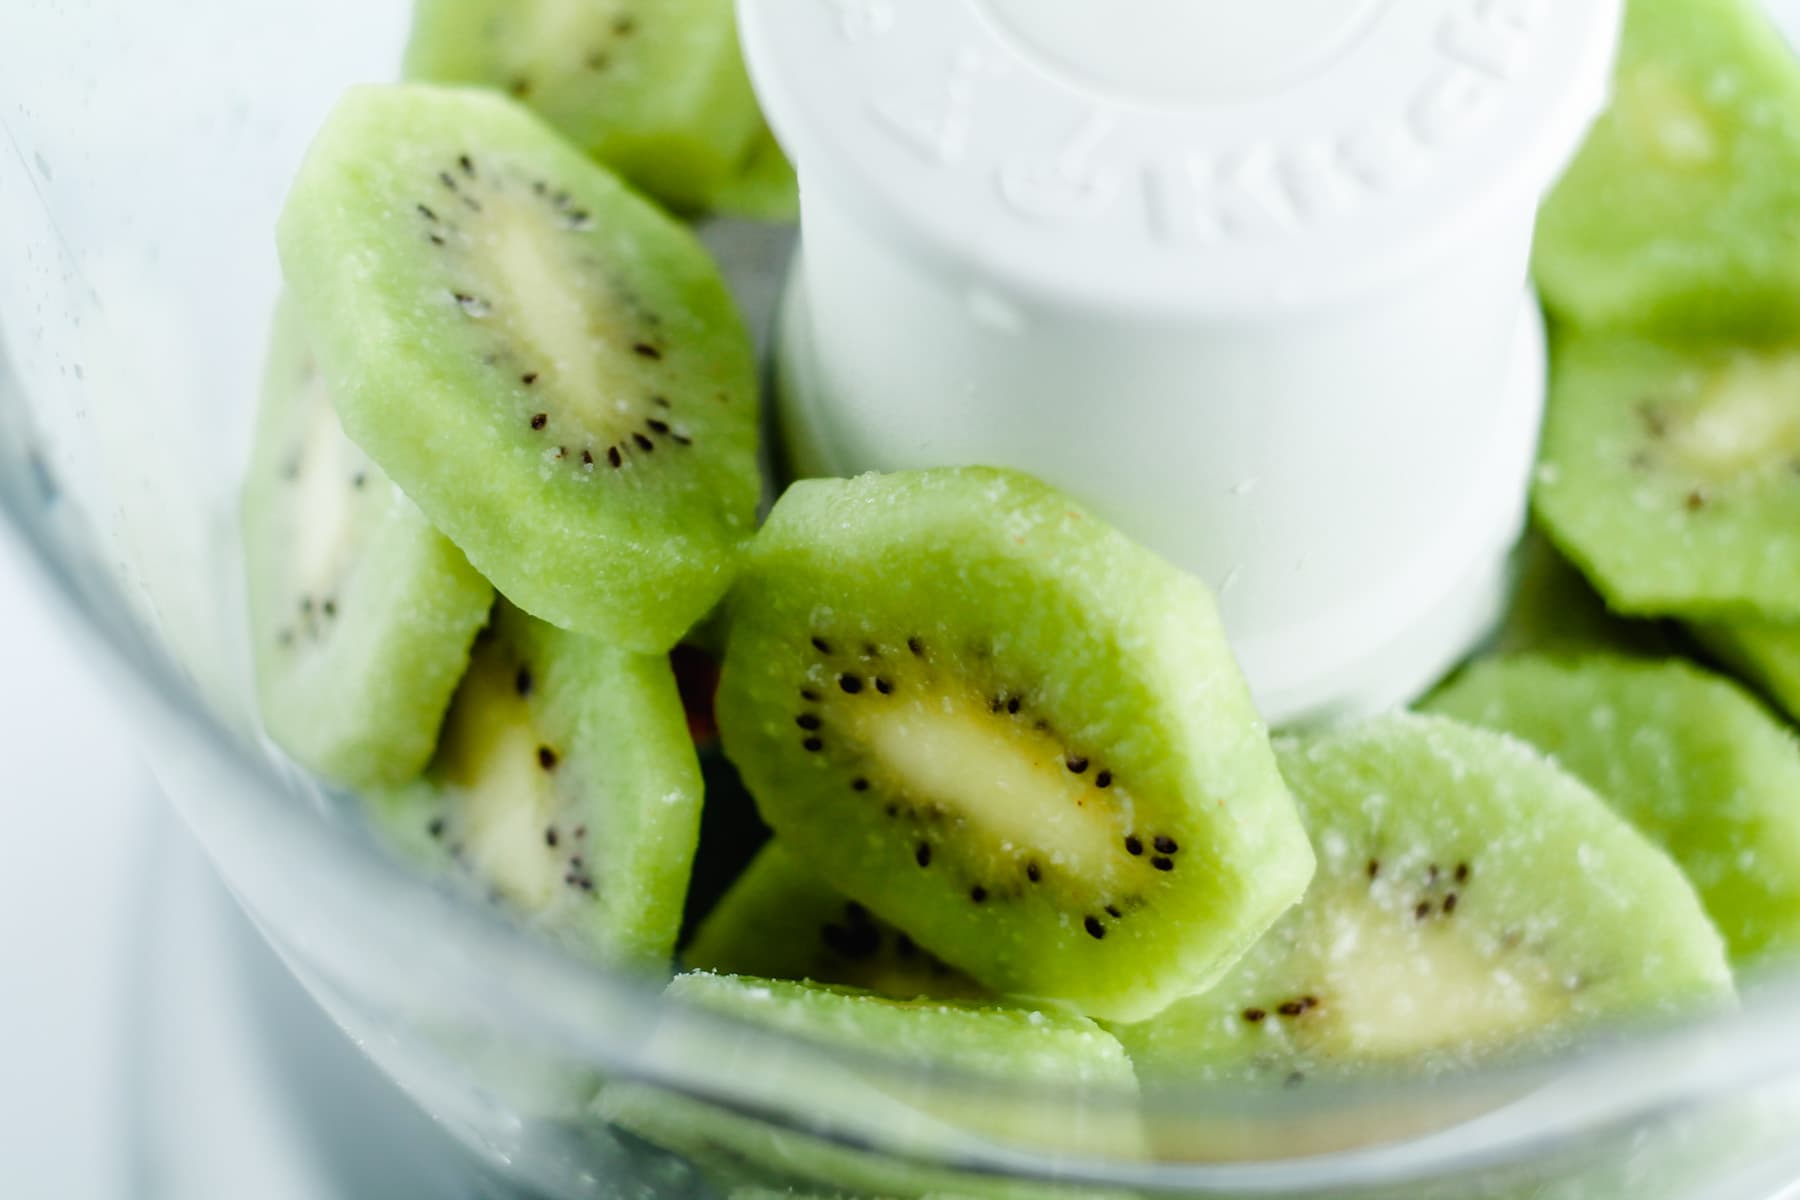 slices of kiwi in a food processor.